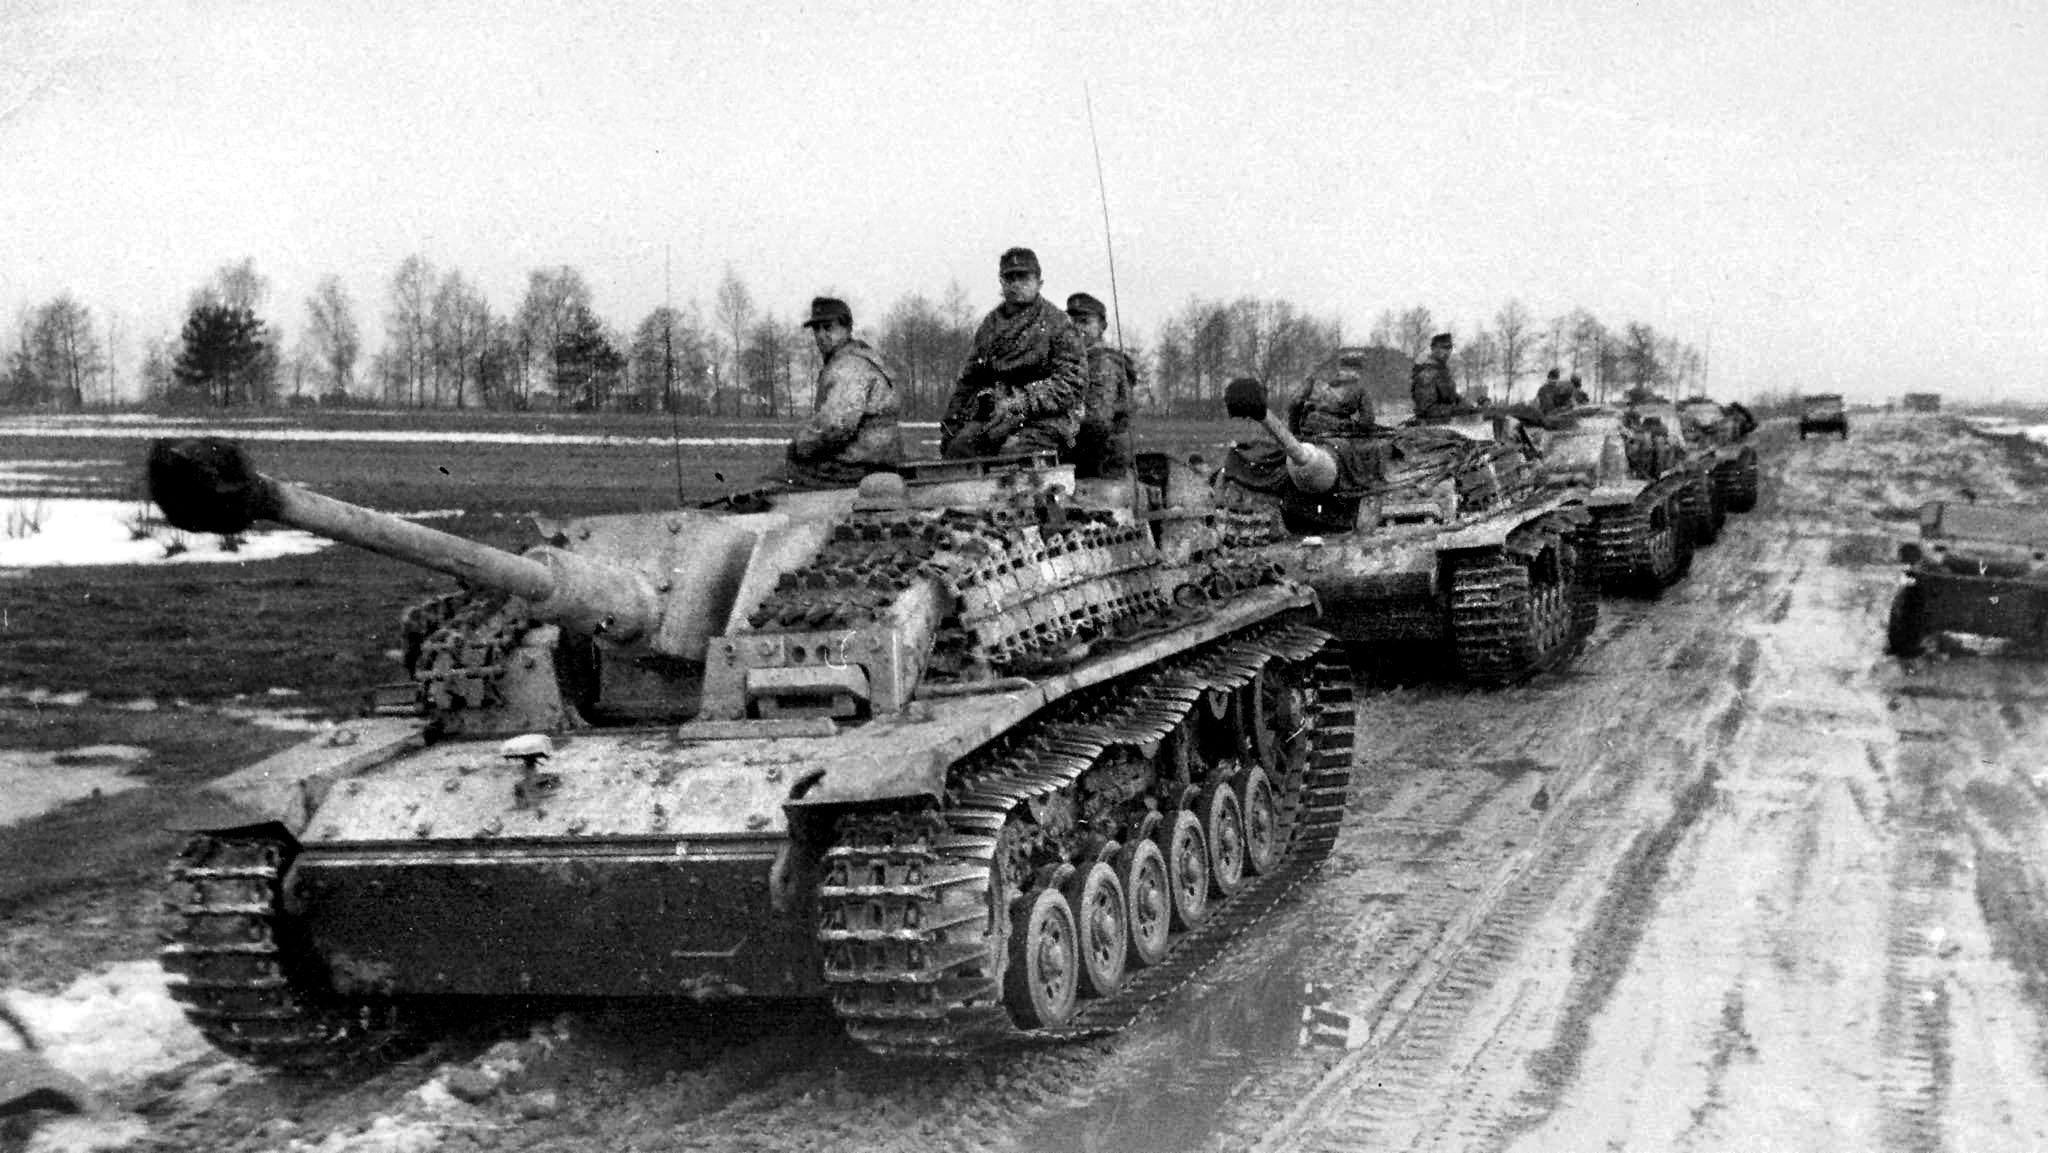 StuG 40 Ausf G tank destroyers move over the muddy melting roads in Ukraine in the winter of 1944. During the encirclement, Luftwaffe Ju-52s dropped petrol barrels into the mud, often 200-300 yards away. Steel wires were attached to winch them in. With ammunition and fuel being prioritized, the Panzer crews and grenadiers received little food.
